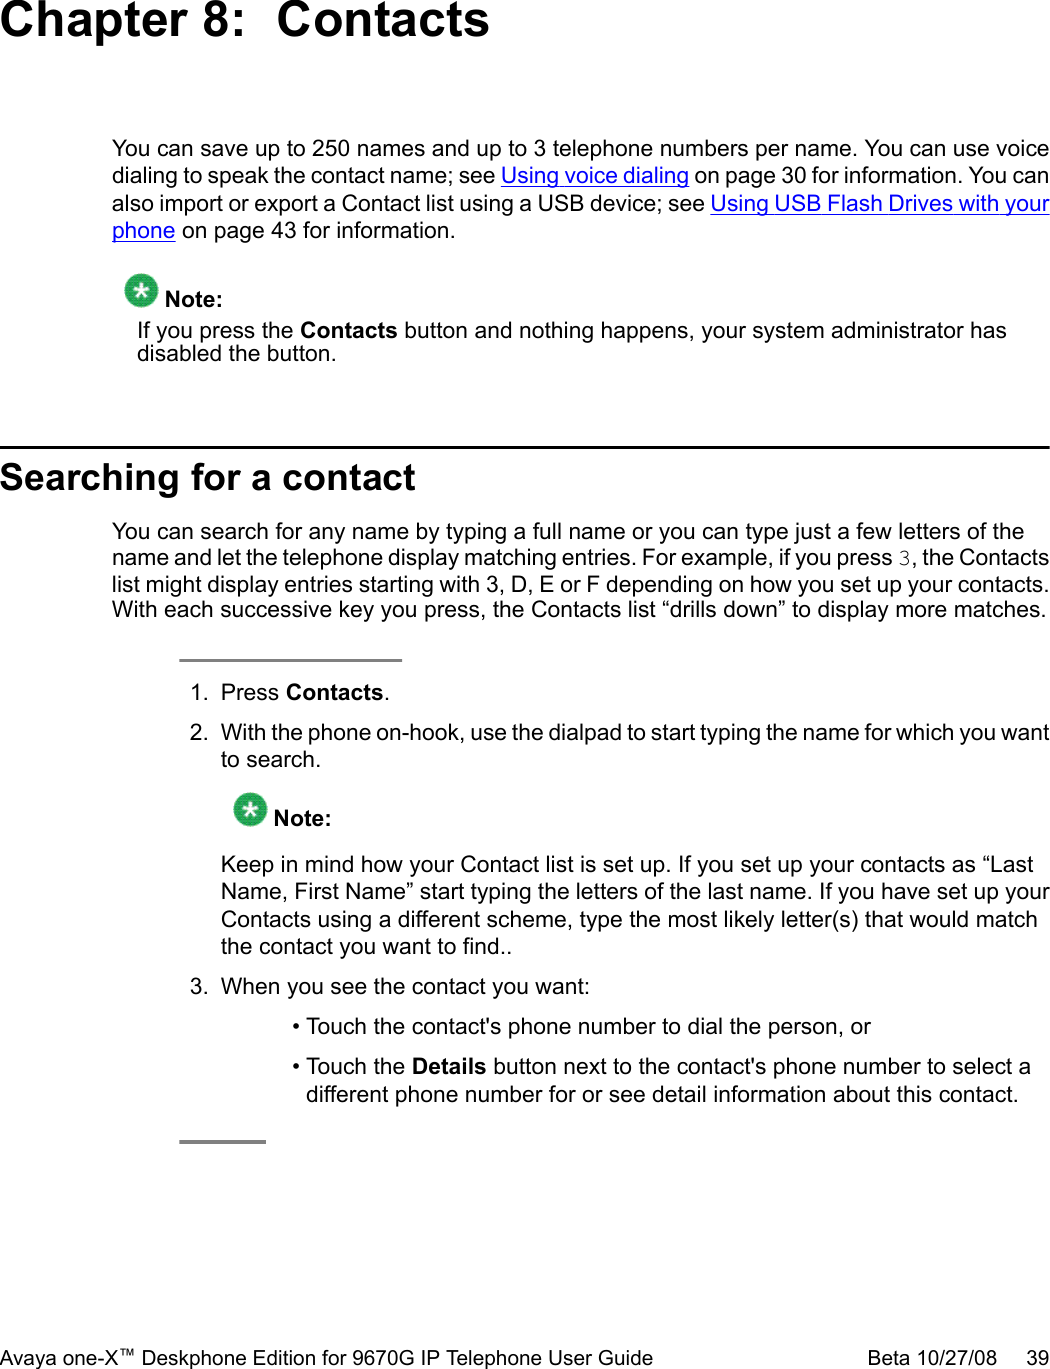 Chapter 8:  ContactsYou can save up to 250 names and up to 3 telephone numbers per name. You can use voicedialing to speak the contact name; see Using voice dialing on page 30 for information. You canalso import or export a Contact list using a USB device; see Using USB Flash Drives with yourphone on page 43 for information. Note:If you press the Contacts button and nothing happens, your system administrator hasdisabled the button.Searching for a contactYou can search for any name by typing a full name or you can type just a few letters of thename and let the telephone display matching entries. For example, if you press 3, the Contactslist might display entries starting with 3, D, E or F depending on how you set up your contacts.With each successive key you press, the Contacts list “drills down” to display more matches.1. Press Contacts.2. With the phone on-hook, use the dialpad to start typing the name for which you wantto search. Note:Keep in mind how your Contact list is set up. If you set up your contacts as “LastName, First Name” start typing the letters of the last name. If you have set up yourContacts using a different scheme, type the most likely letter(s) that would matchthe contact you want to find..3. When you see the contact you want:• Touch the contact&apos;s phone number to dial the person, or• Touch the Details button next to the contact&apos;s phone number to select adifferent phone number for or see detail information about this contact.Avaya one-X™ Deskphone Edition for 9670G IP Telephone User Guide Beta 10/27/08     39